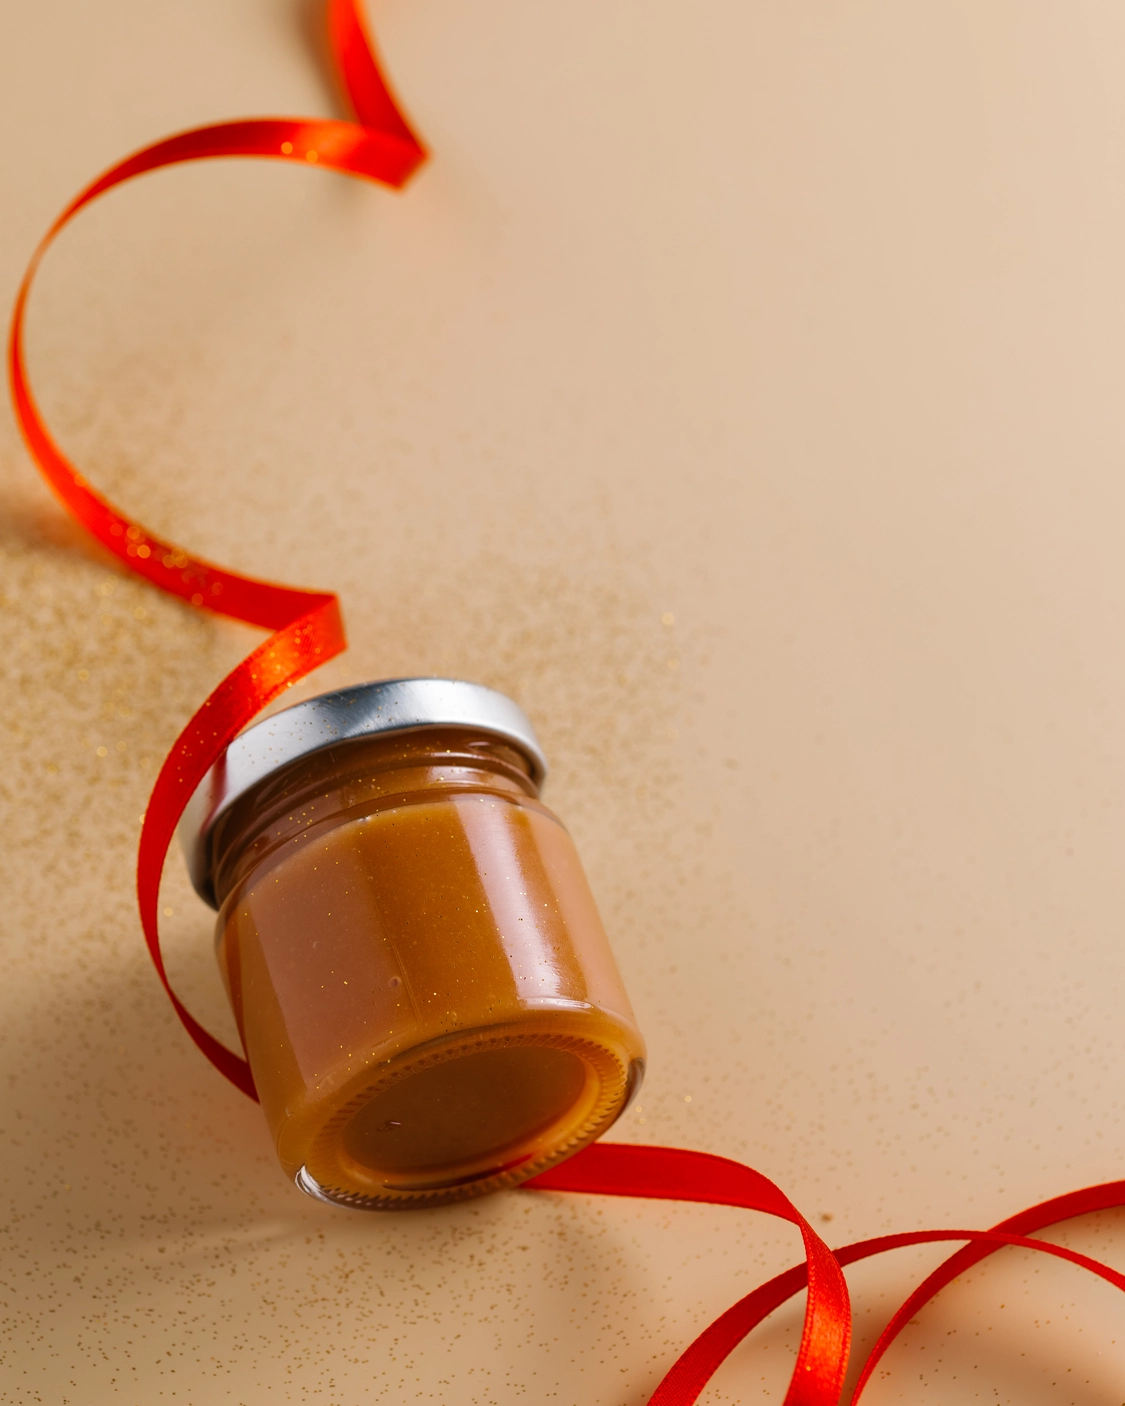 A jar of caramel lies on a beige background. A jar of caramel lies on a beige background. Near it is a red ribbon, which emphasizes the presence of a festive mood and gives a reference to the celebration of the new year.